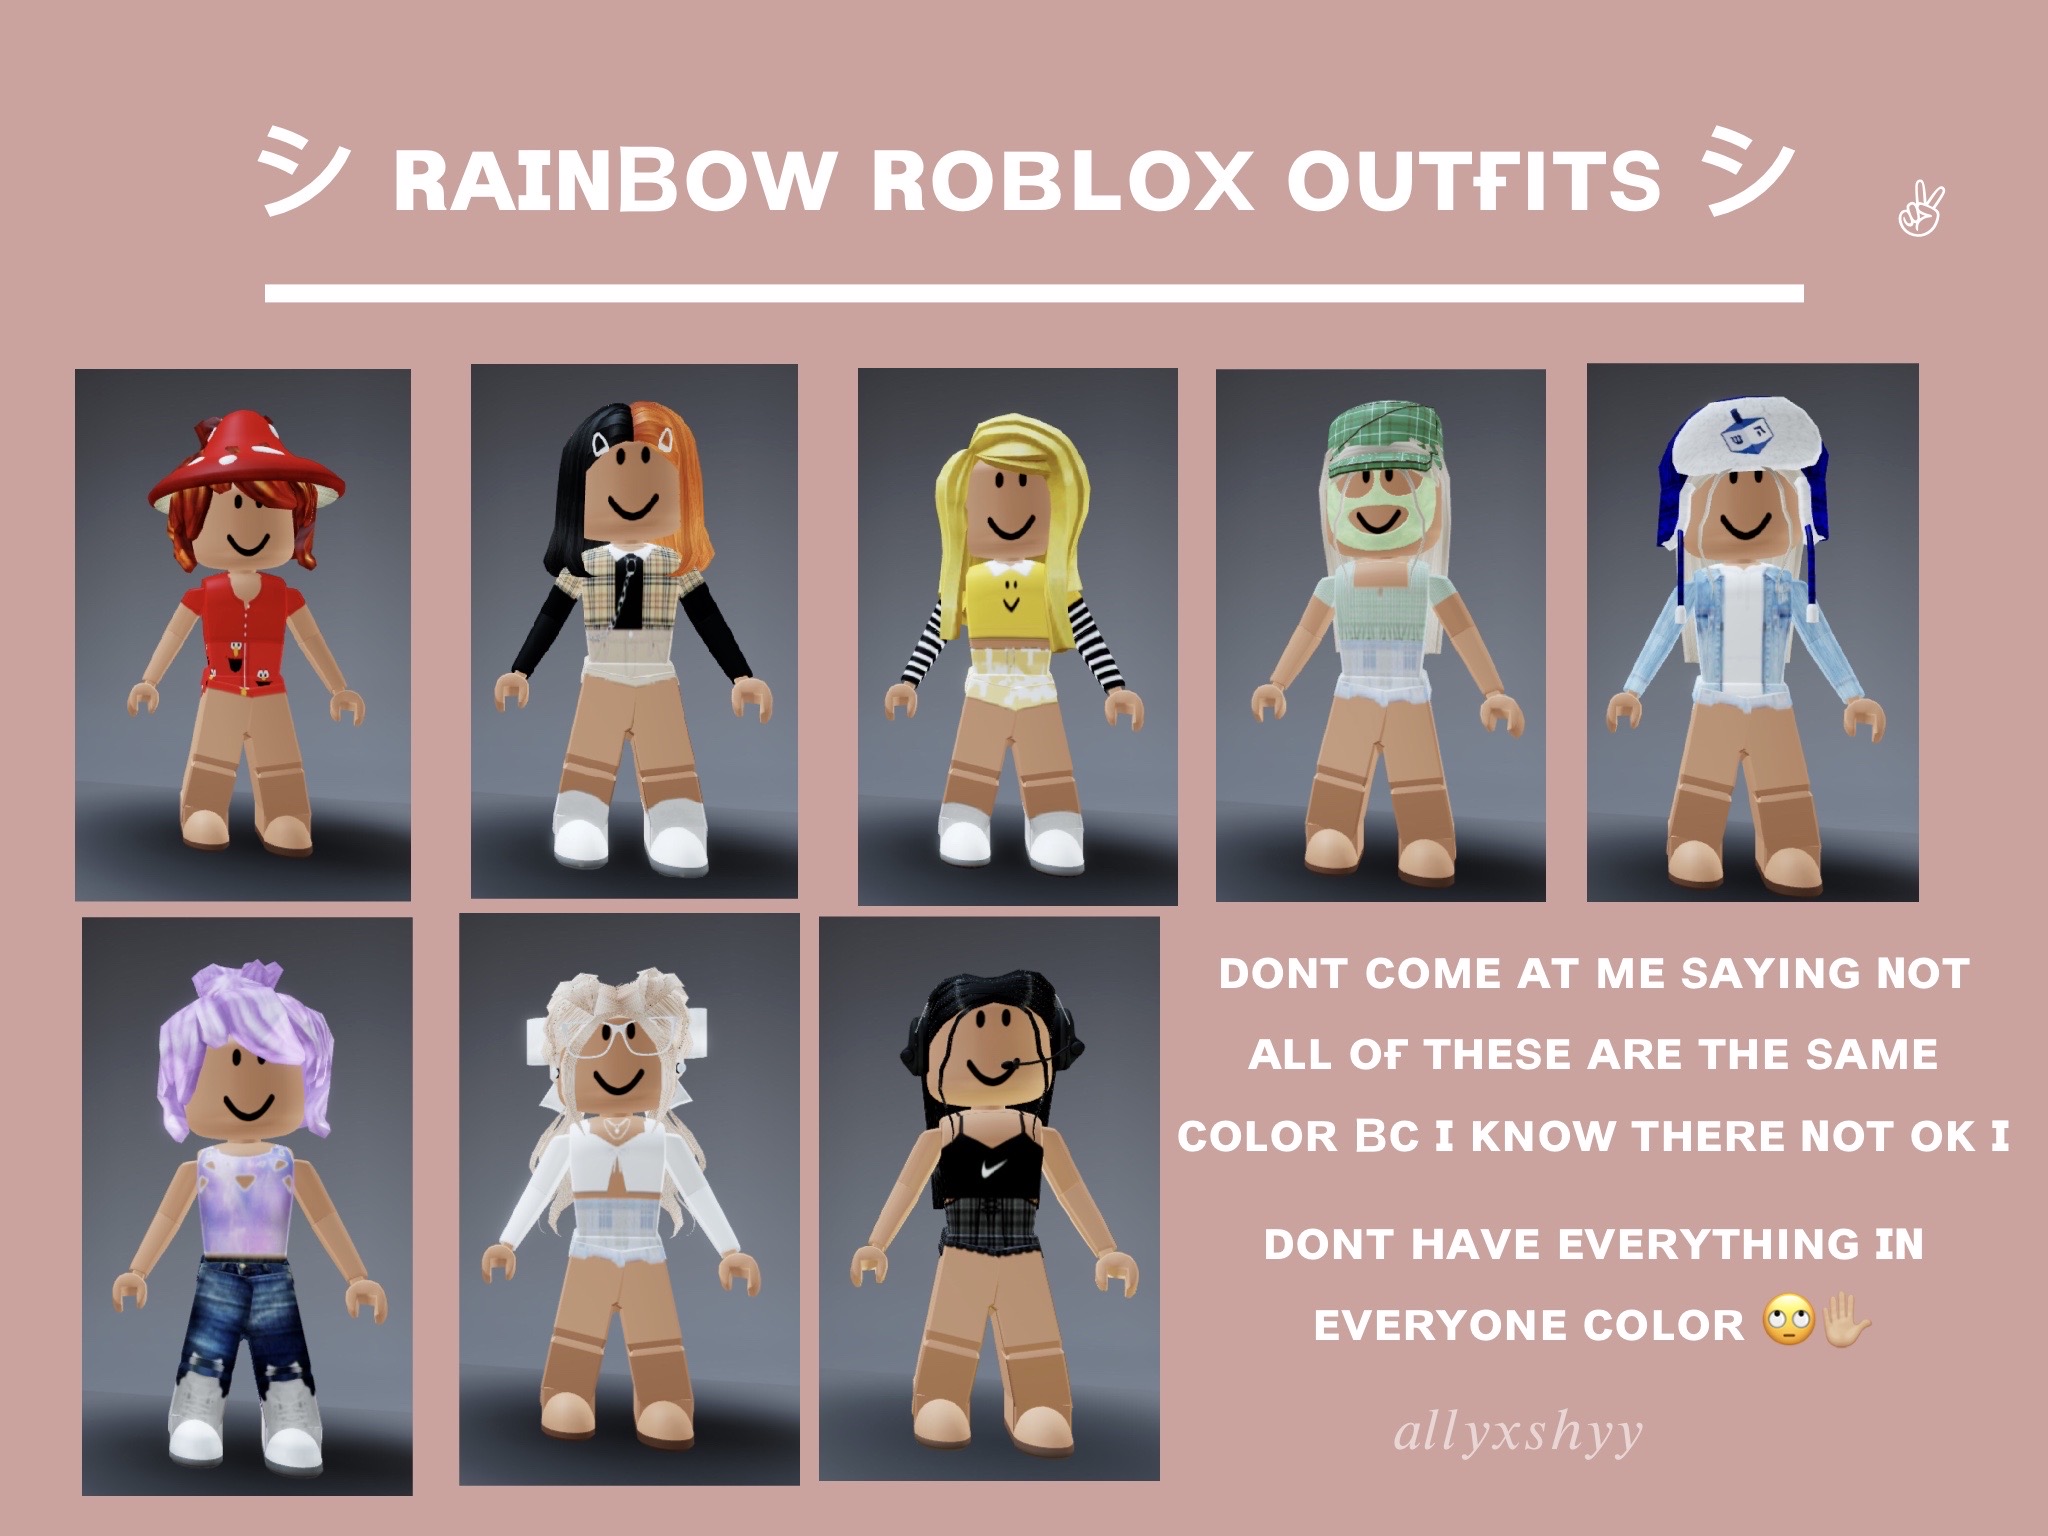 Playadoptme Followme Roblox Toh Image By Just Ari - how to make it so hashtags dont come roblox